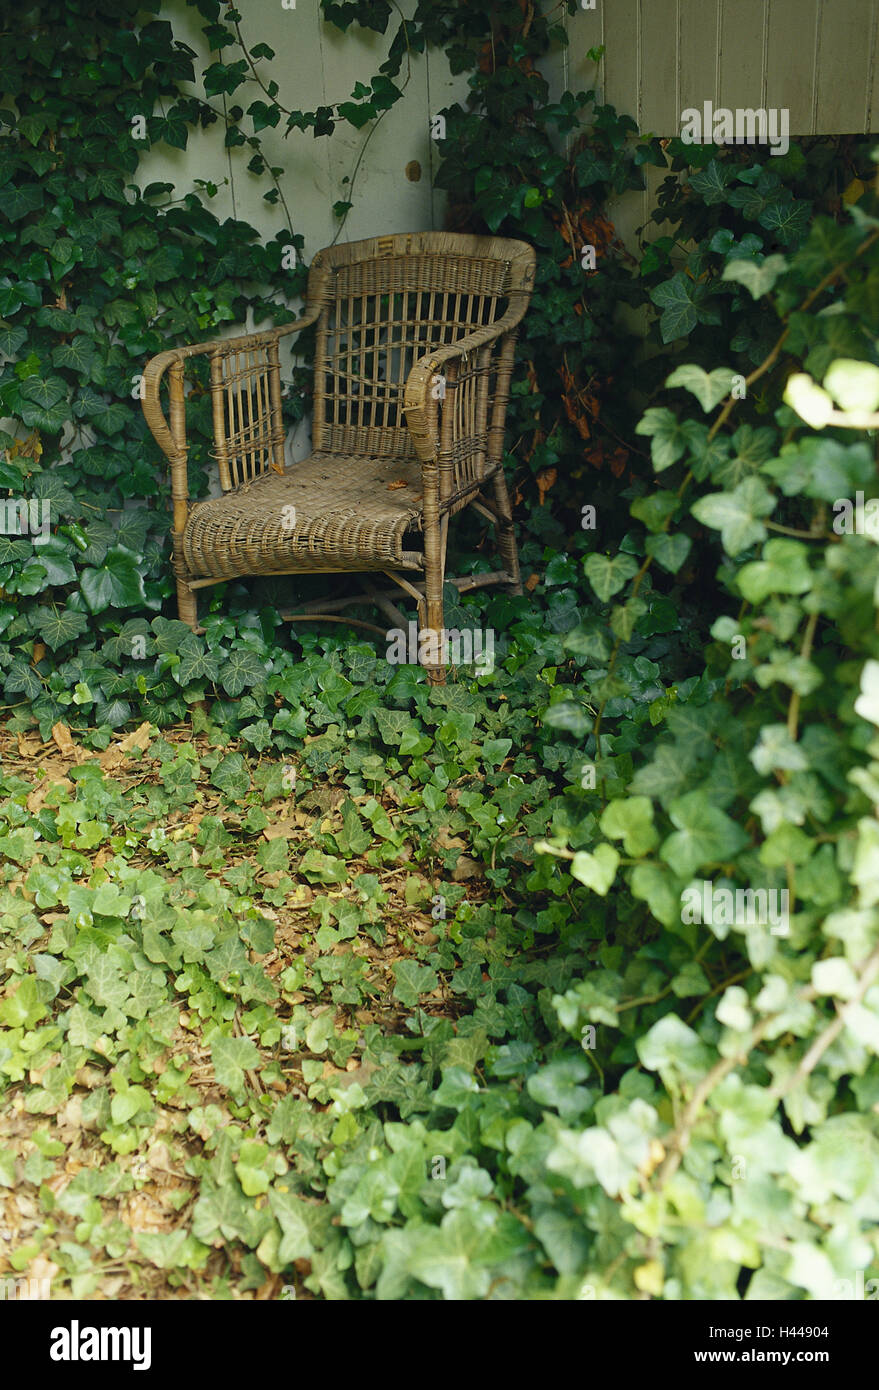 Garden, wicker chair, ivy, Outdoor furniture, arbour, corner, remotely, loneliness, Idyll, romanticism, summer house, deserted, outside, plants, climbing plants, BT, Stock Photo